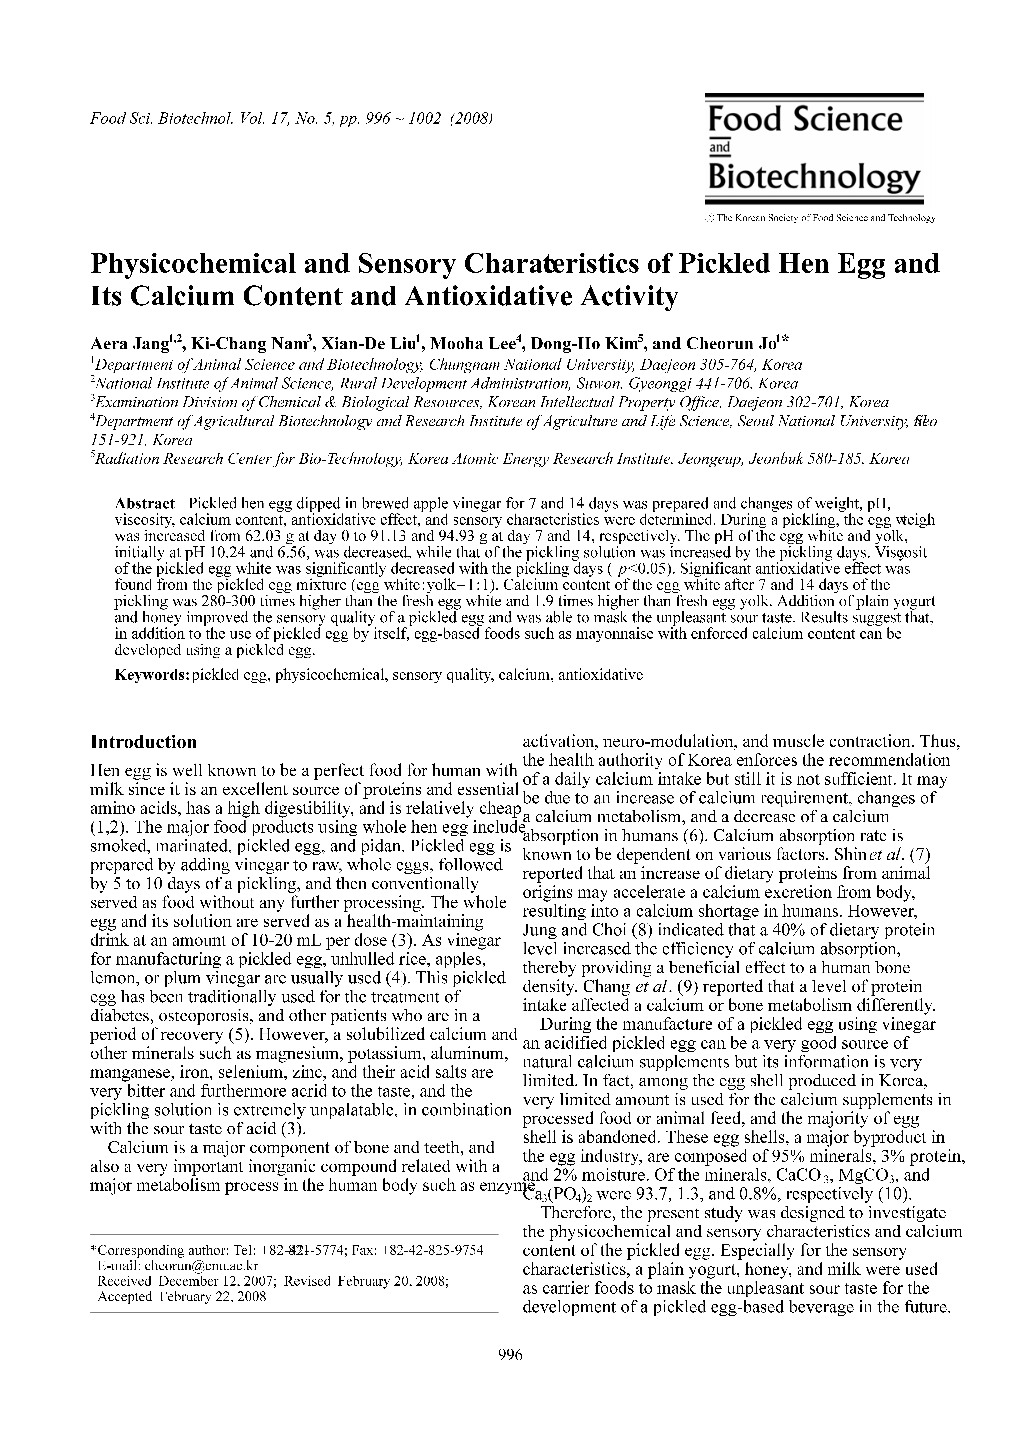 Physicochemical and Sensory Characteristics of Pickled Hen Egg and Its Calcium Content and Antioxidative Activity